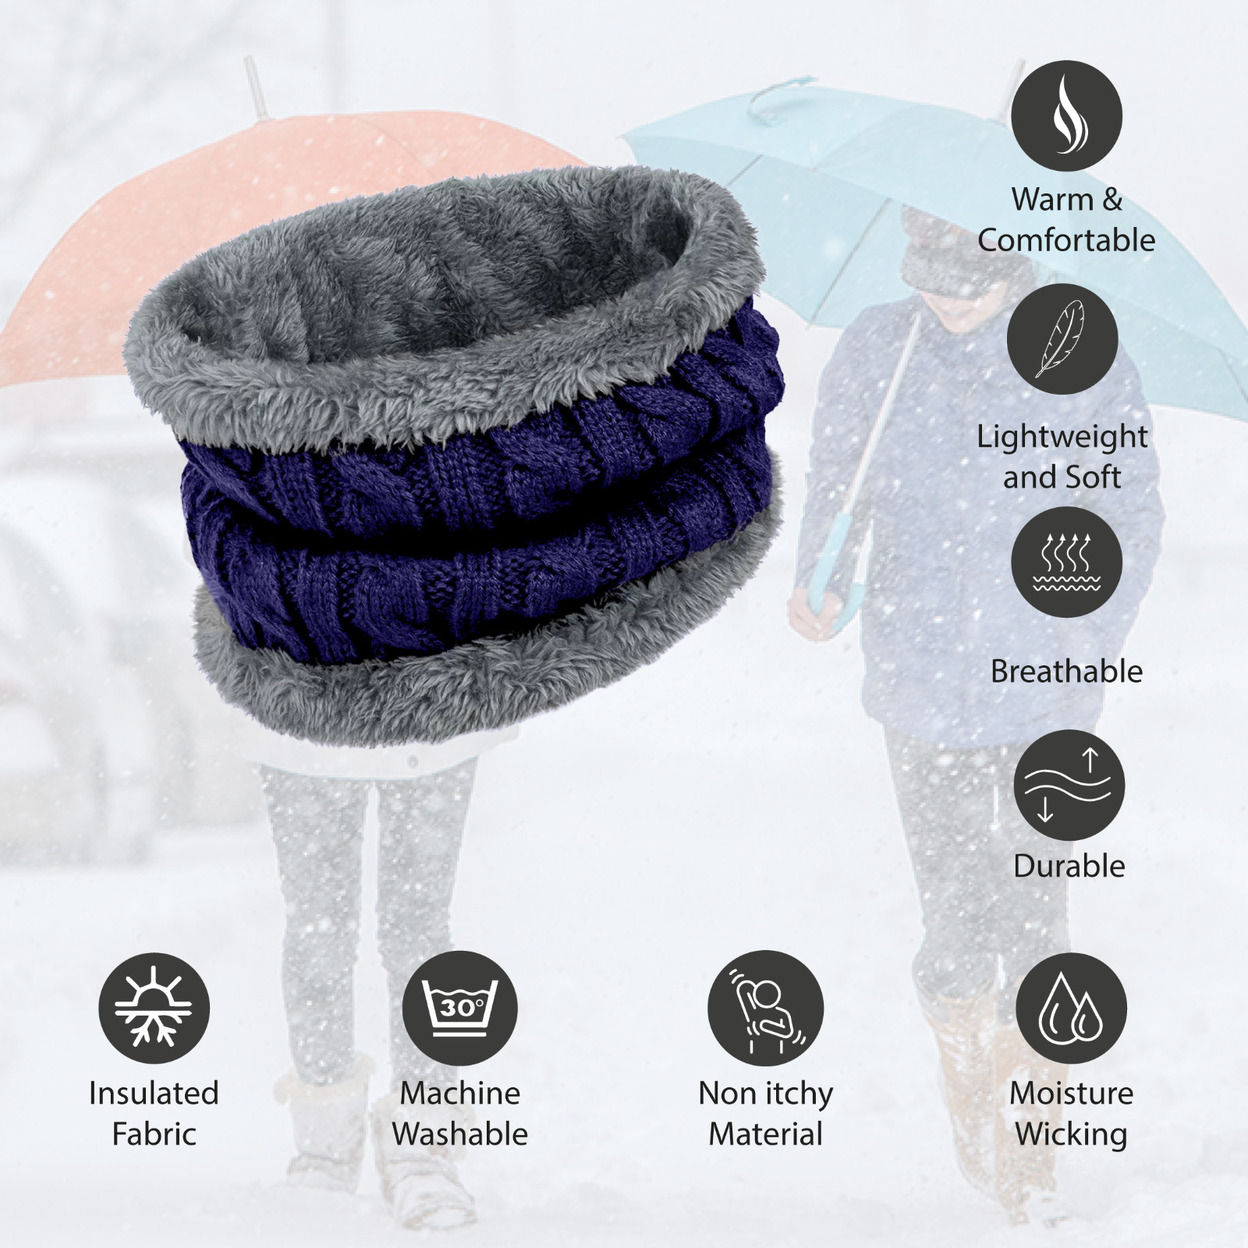 4-Pack: Winter Scarf Cold Weather Cable Knit Neck Warmer - Assorted